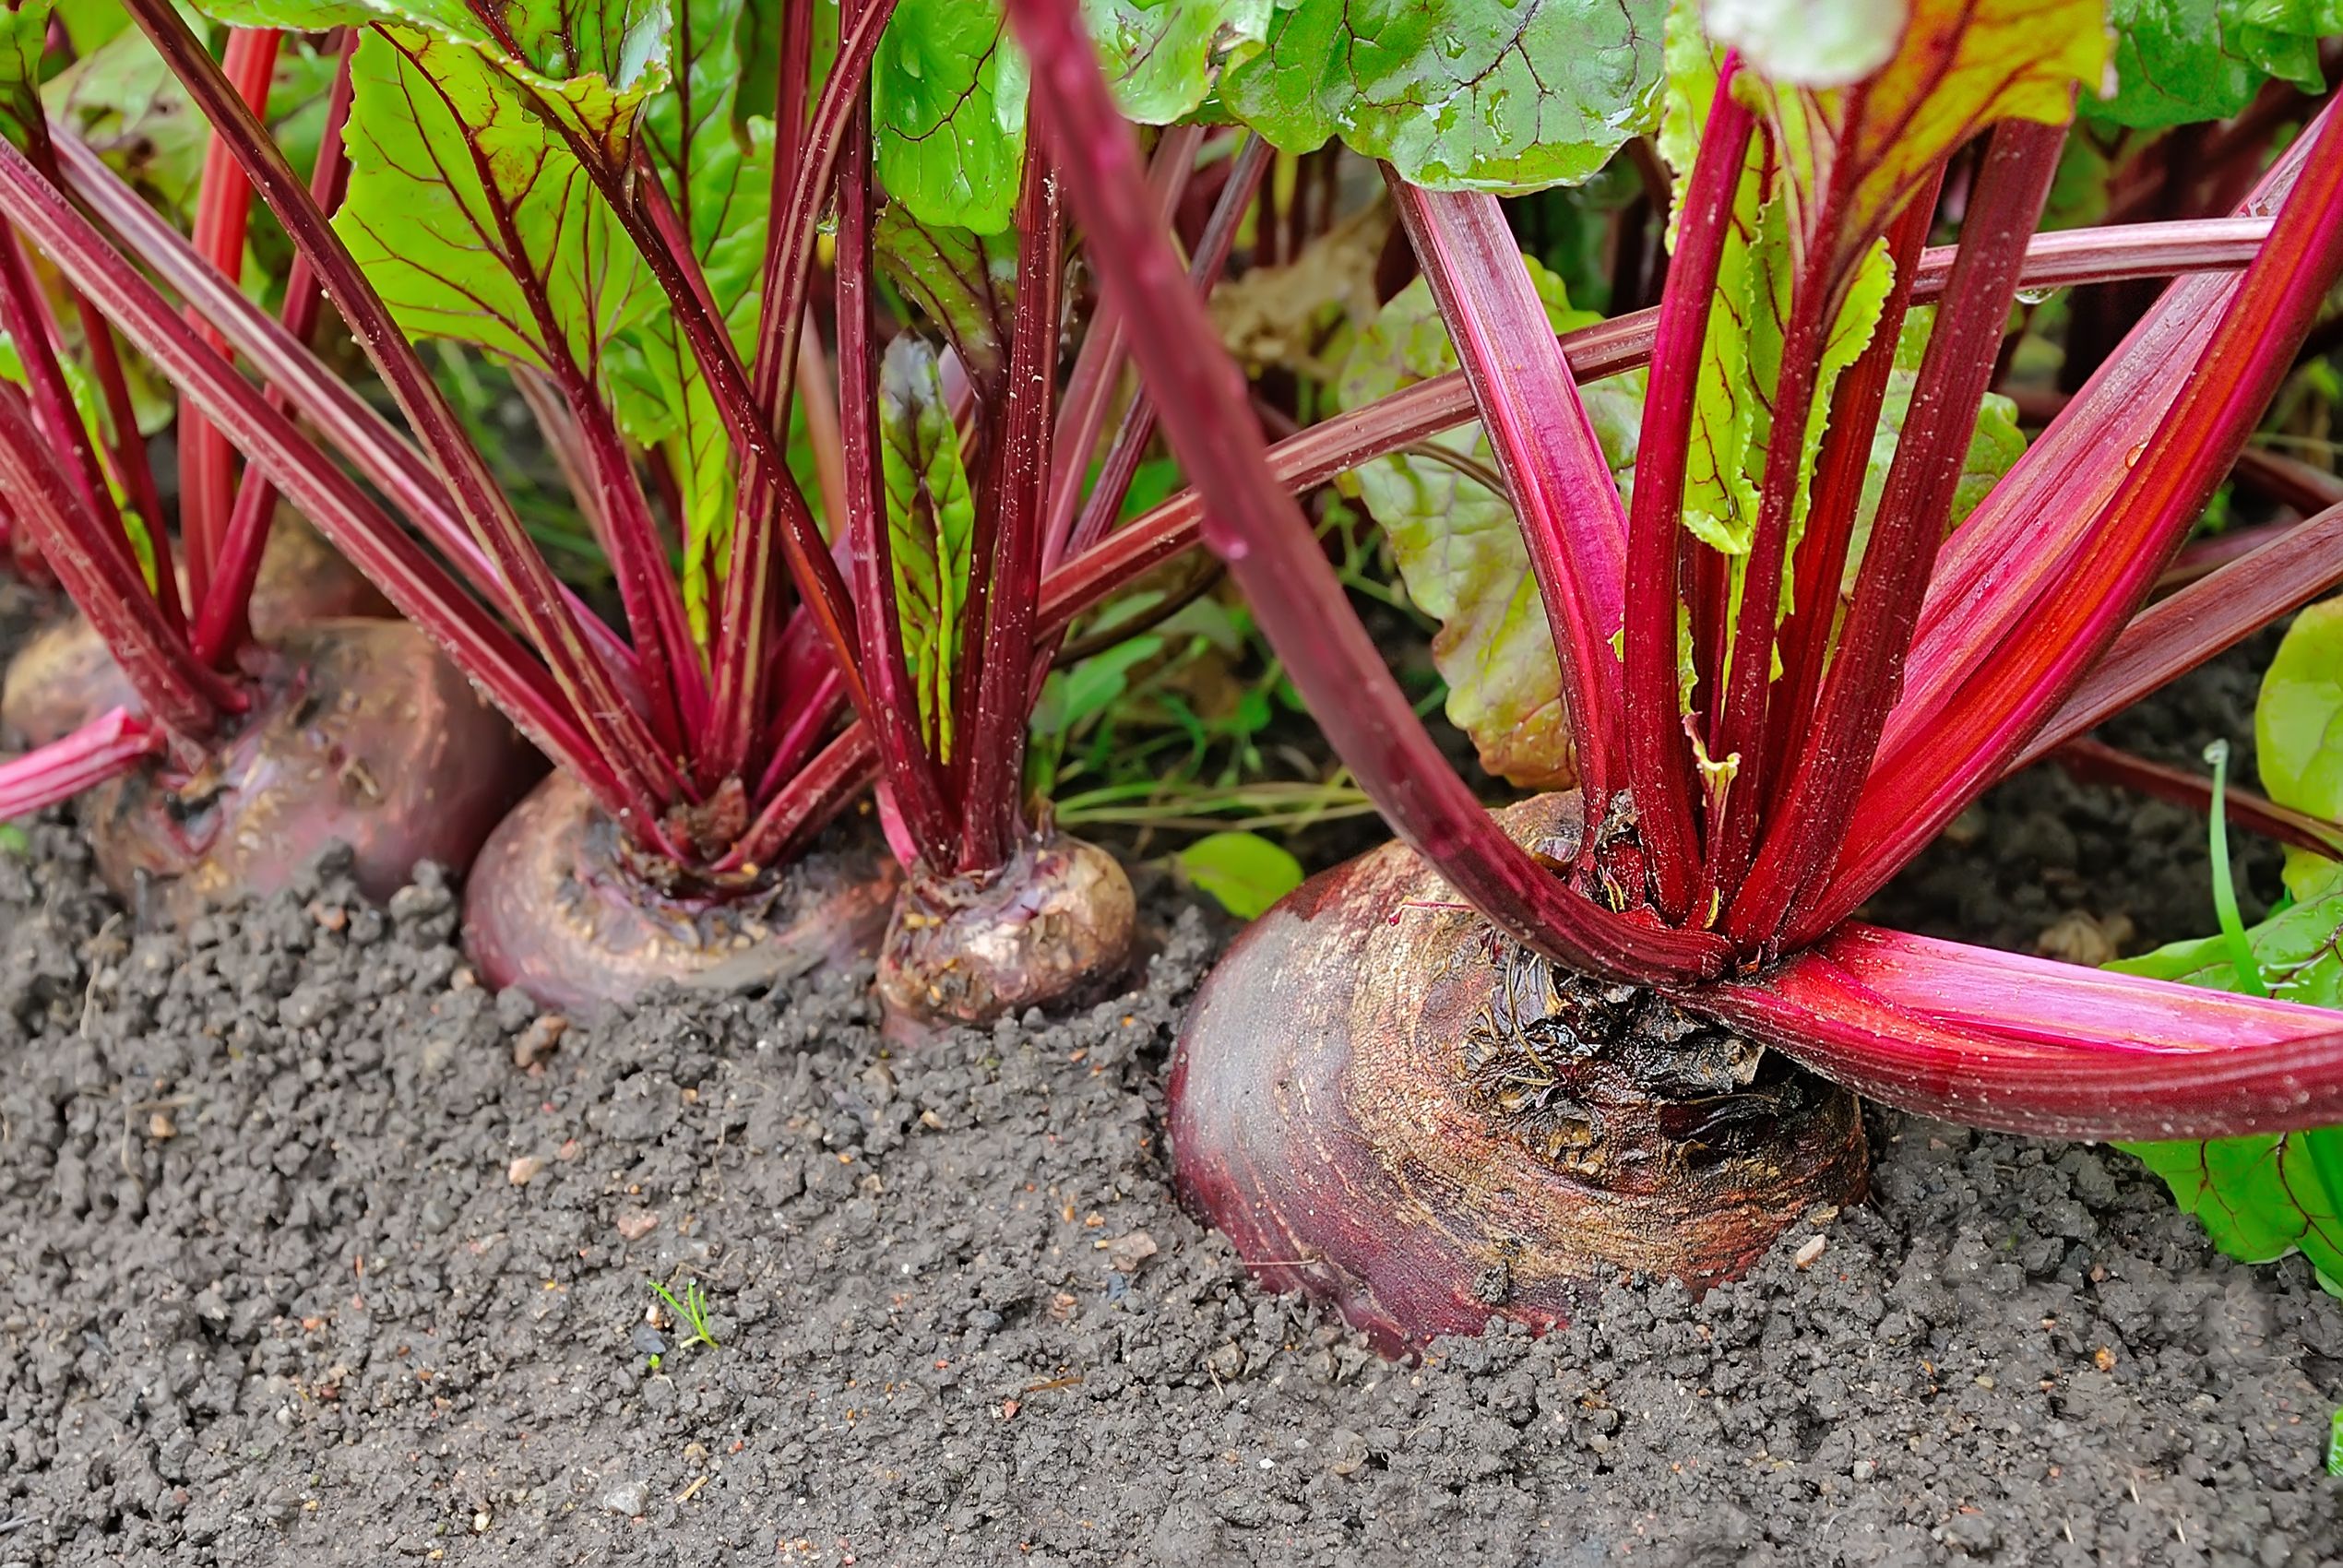 Beetroot In A Vegetable Garden Royalty Free Image 469510946 1534890073 